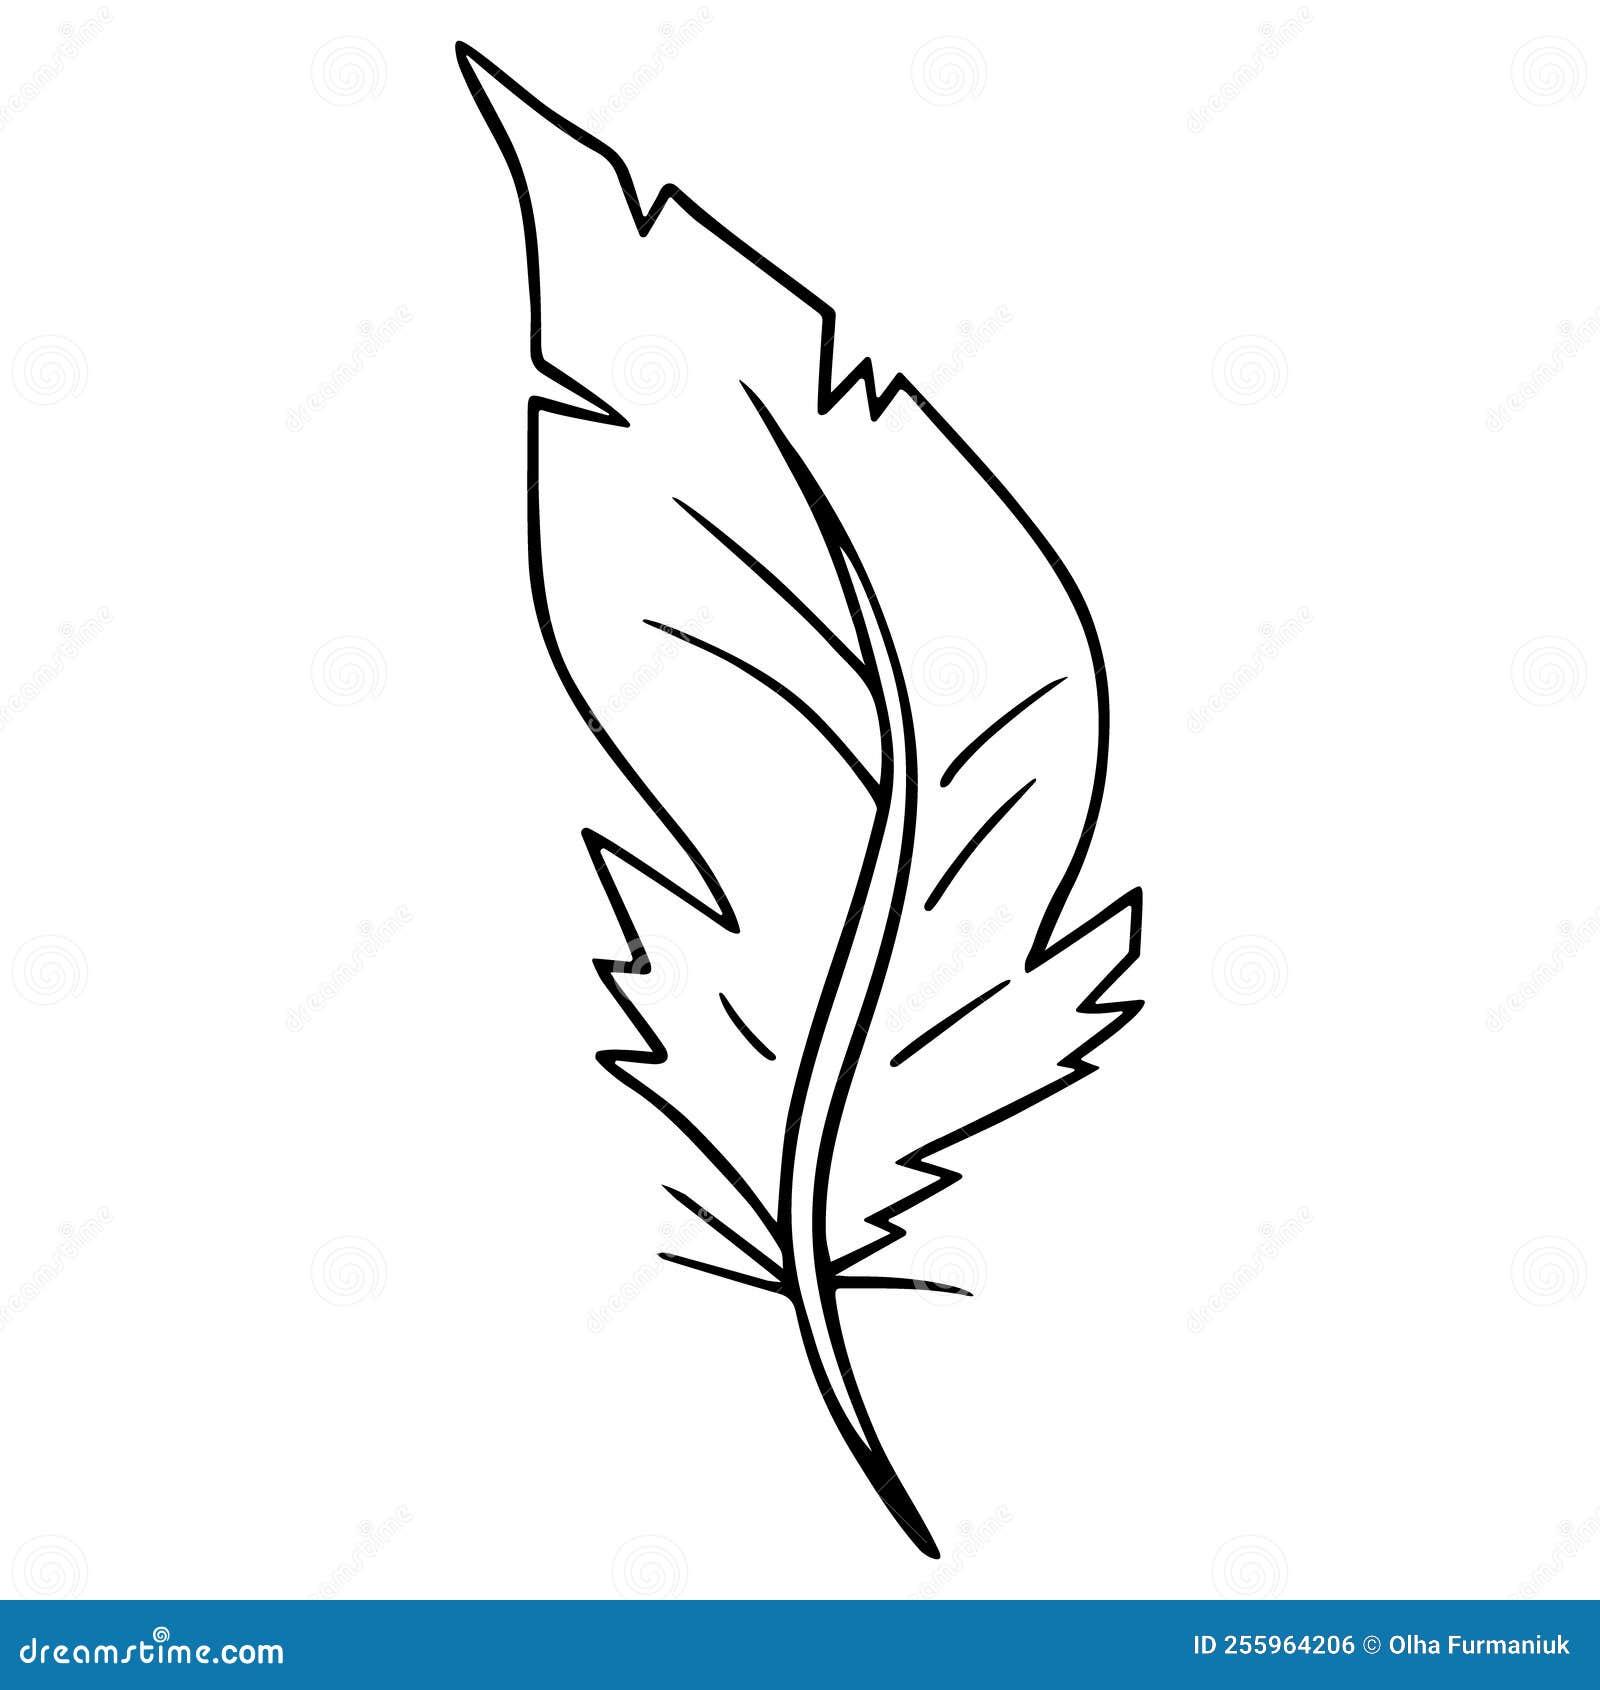 Bird Feather Quill, Writing Ink Pen, Hand Drawn Outline, Doodle Sketch ...